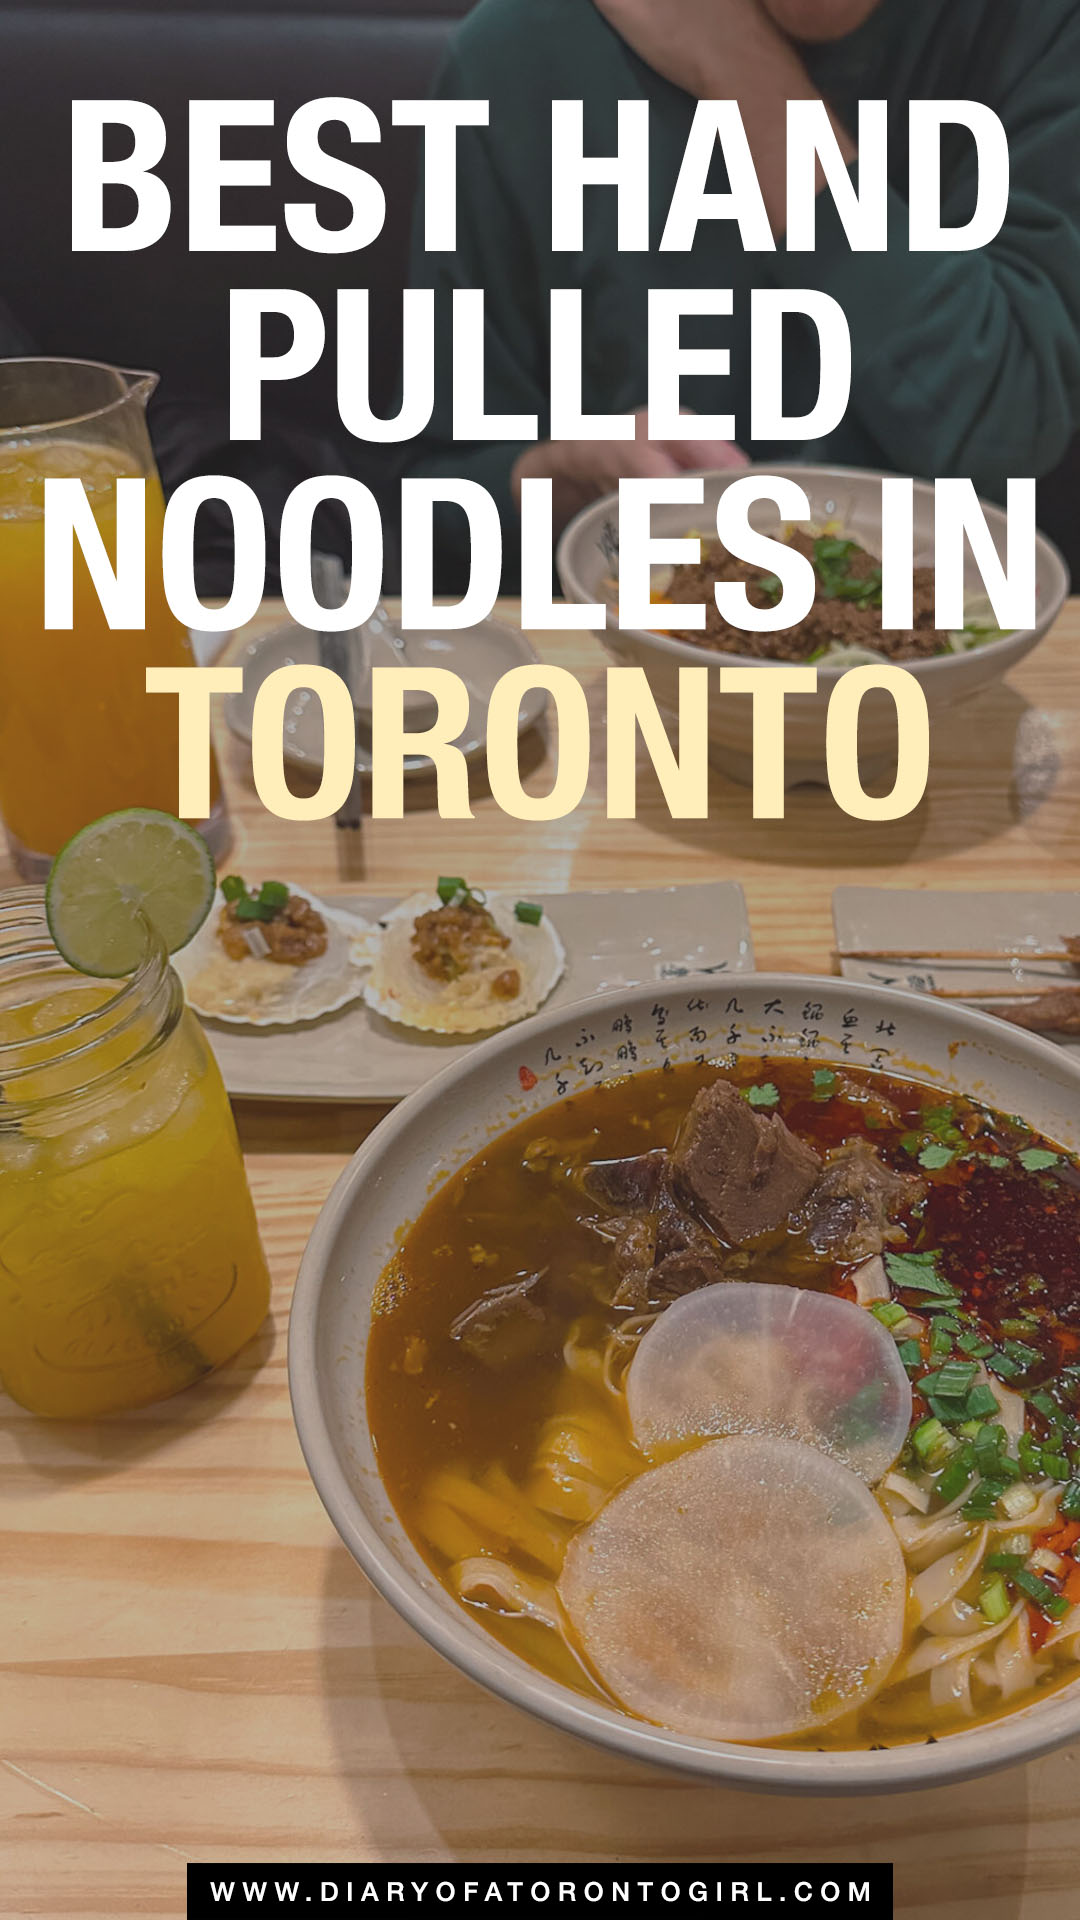 Best hand-pulled noodles in Toronto